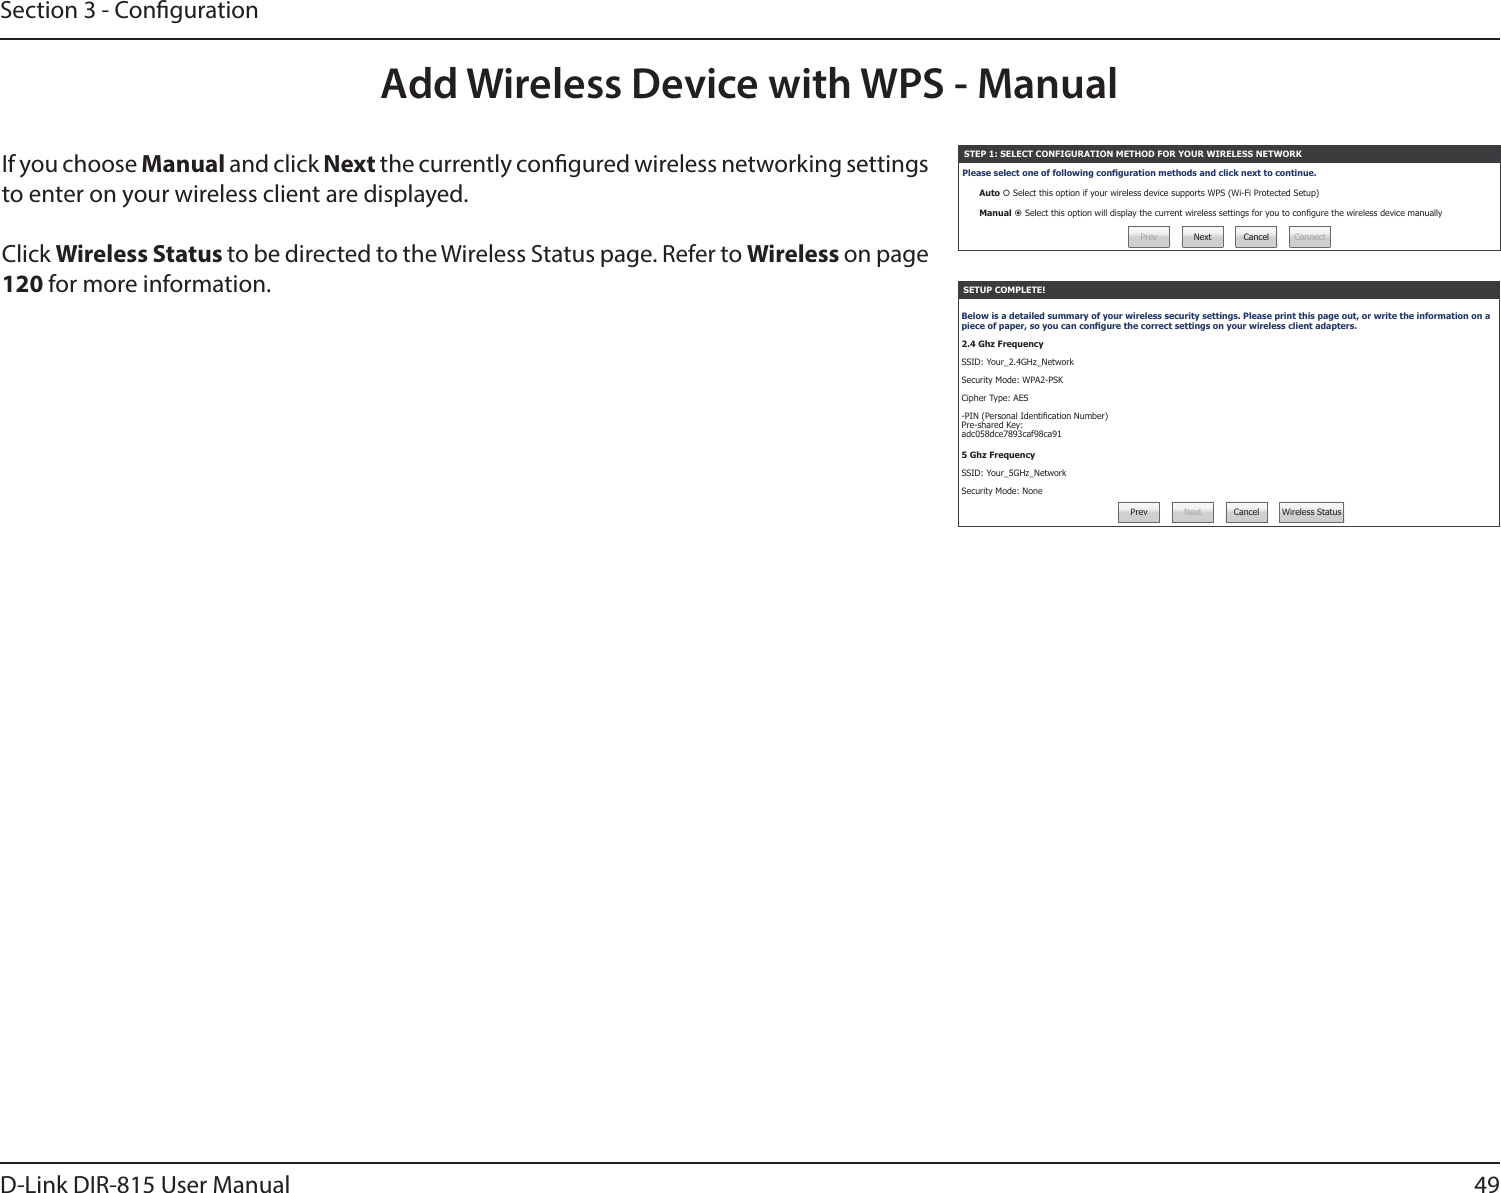 49D-Link DIR-815 User ManualSection 3 - CongurationIf you choose Manual and click Next the currently congured wireless networking settings to enter on your wireless client are displayed. Click Wireless Status to be directed to the Wireless Status page. Refer to Wireless on page 120 for more information.Add Wireless Device with WPS - ManualSETUP COMPLETE!Below is a detailed summary of your wireless security settings. Please print this page out, or write the information on a piece of paper, so you can congure the correct settings on your wireless client adapters.2.4 Ghz FrequencySSID: Your_2.4GHz_NetworkSecurity Mode: WPA2-PSKCipher Type: AES-PIN (Personal Identication Number) Pre-shared Key: adc058dce7893caf98ca915 Ghz FrequencySSID: Your_5GHz_NetworkSecurity Mode: None Prev Next Cancel Wireless StatusSTEP 1: SELECT CONFIGURATION METHOD FOR YOUR WIRELESS NETWORKPlease select one of following conguration methods and click next to continue.Auto  Select this option if your wireless device supports WPS (Wi-Fi Protected Setup)Manual  Select this option will display the current wireless settings for you to congure the wireless device manuallyPrev Next Cancel Connect